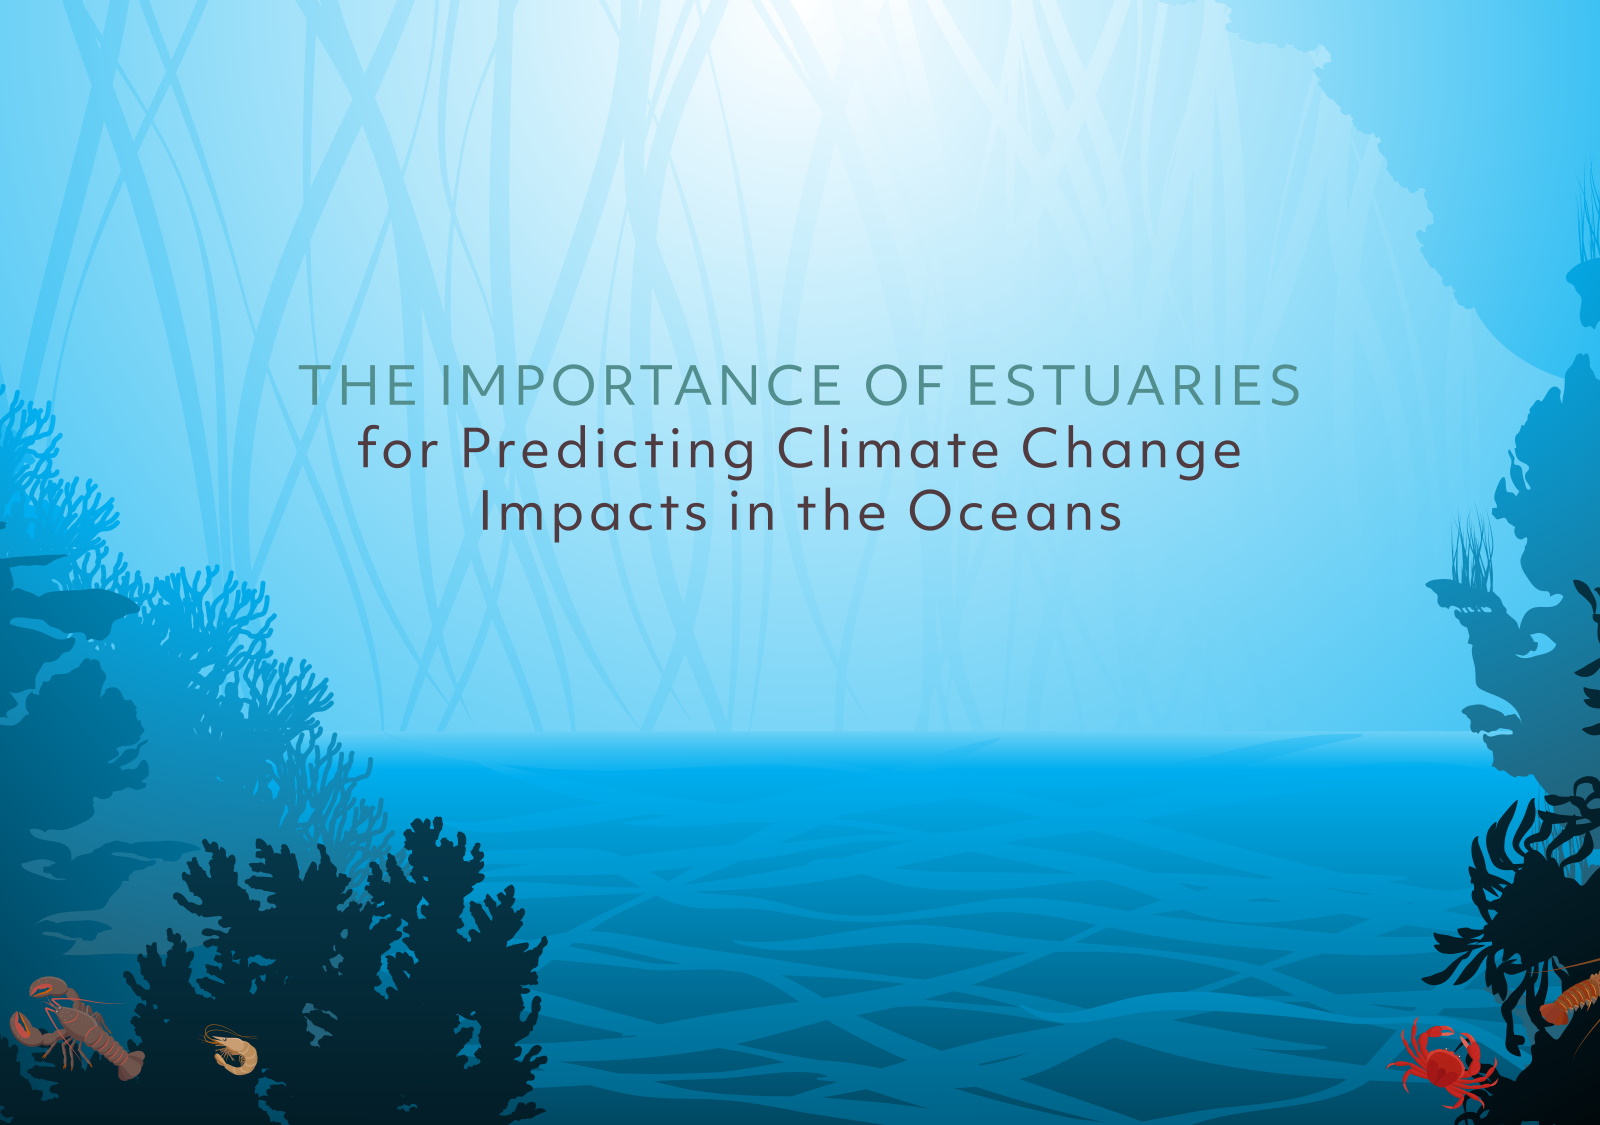 Krti Tallam | The Importance of Estuaries for Predicting Climate Change Impacts in the Oceans